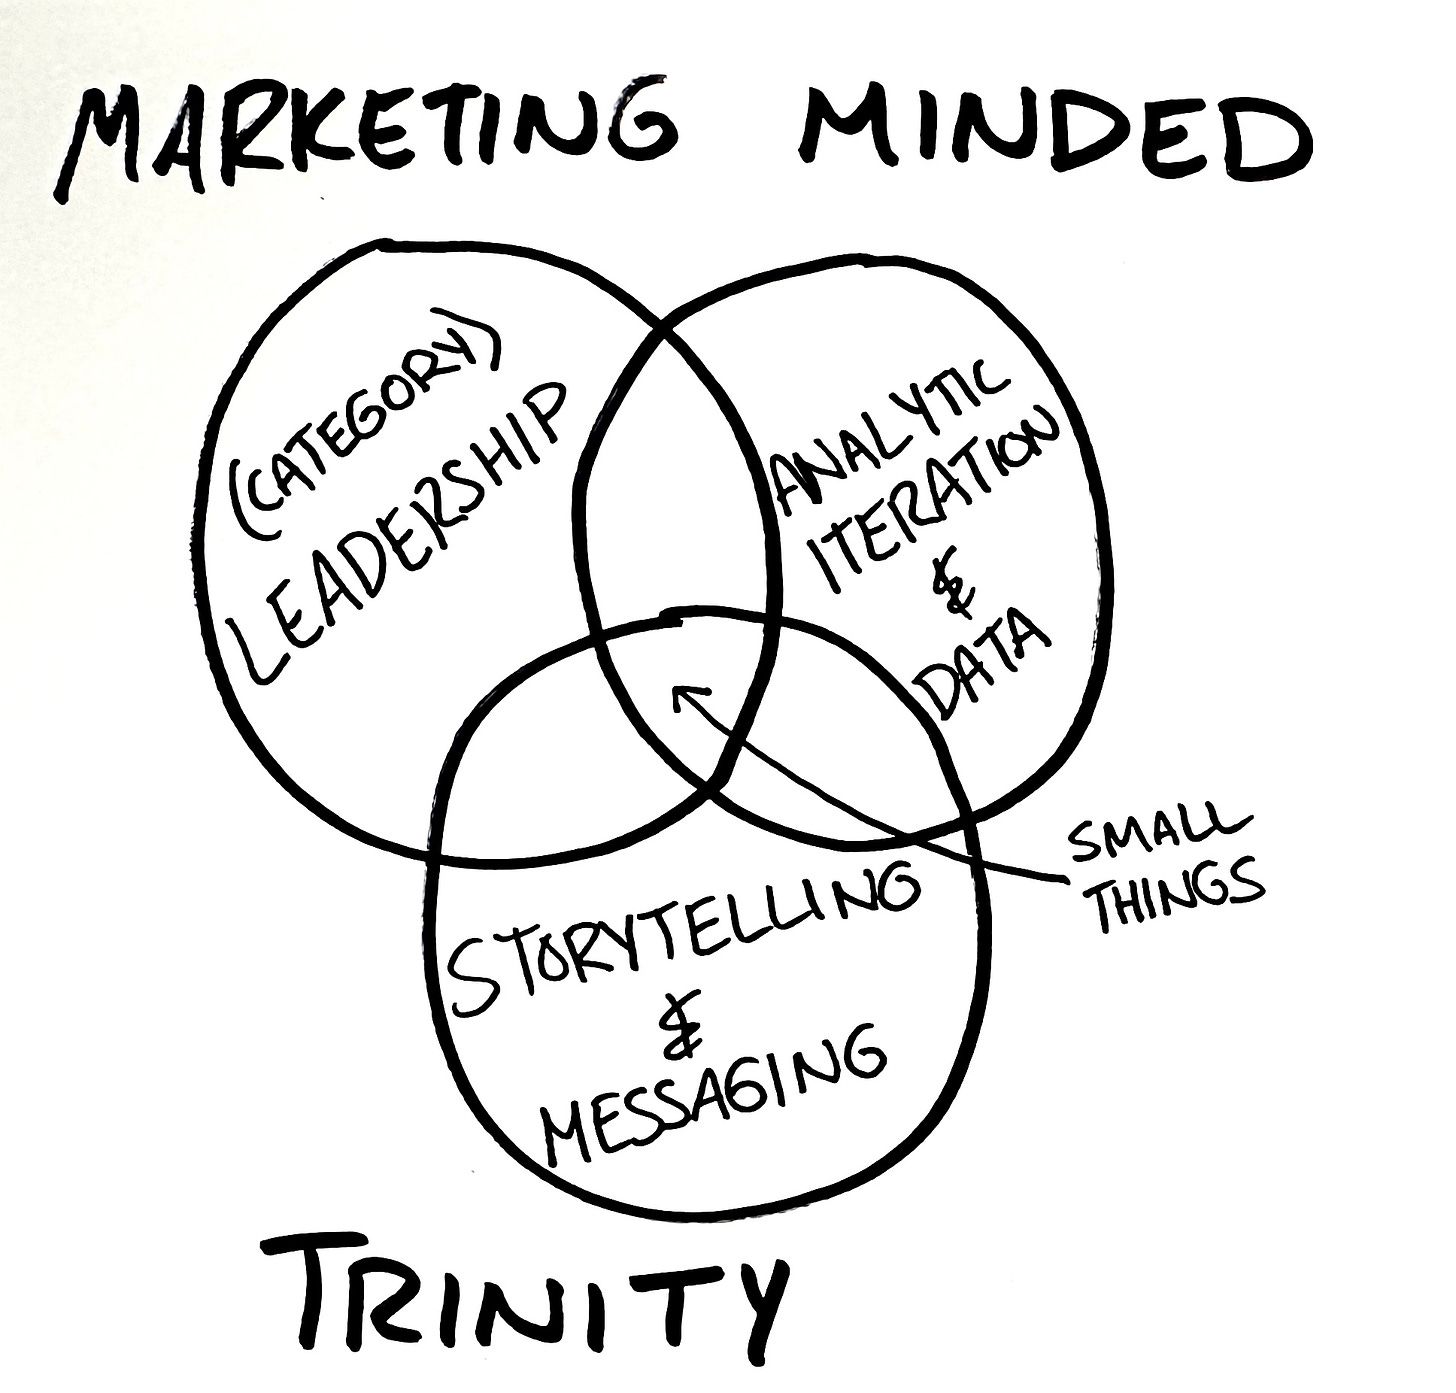 a hand drawn venn diagram with 3 circles titled Marketing Minded Trinity. One says (category) leadership, another says analytic iteration & data, and the last one says storytelling & messaging. The central overlap has an arrow drawn to it from the label small things.